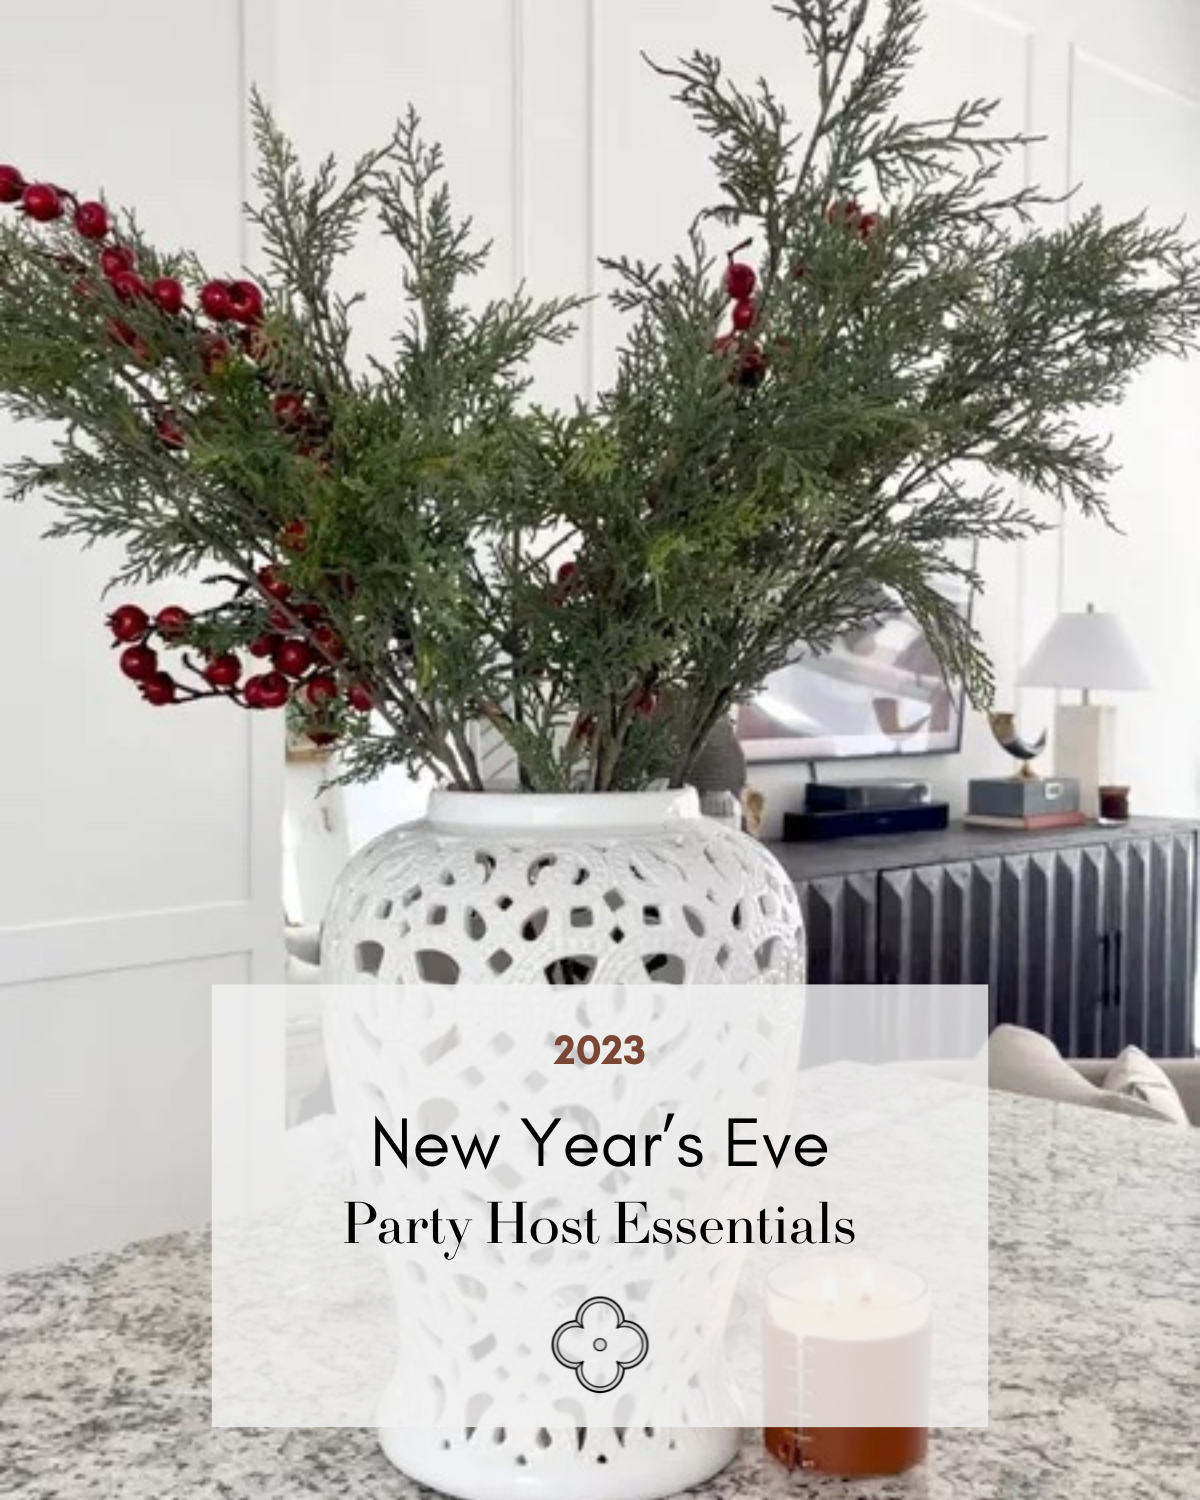 new year's eve party host essentials | #NYE #newyearseven #party #host #essentials #partyhost